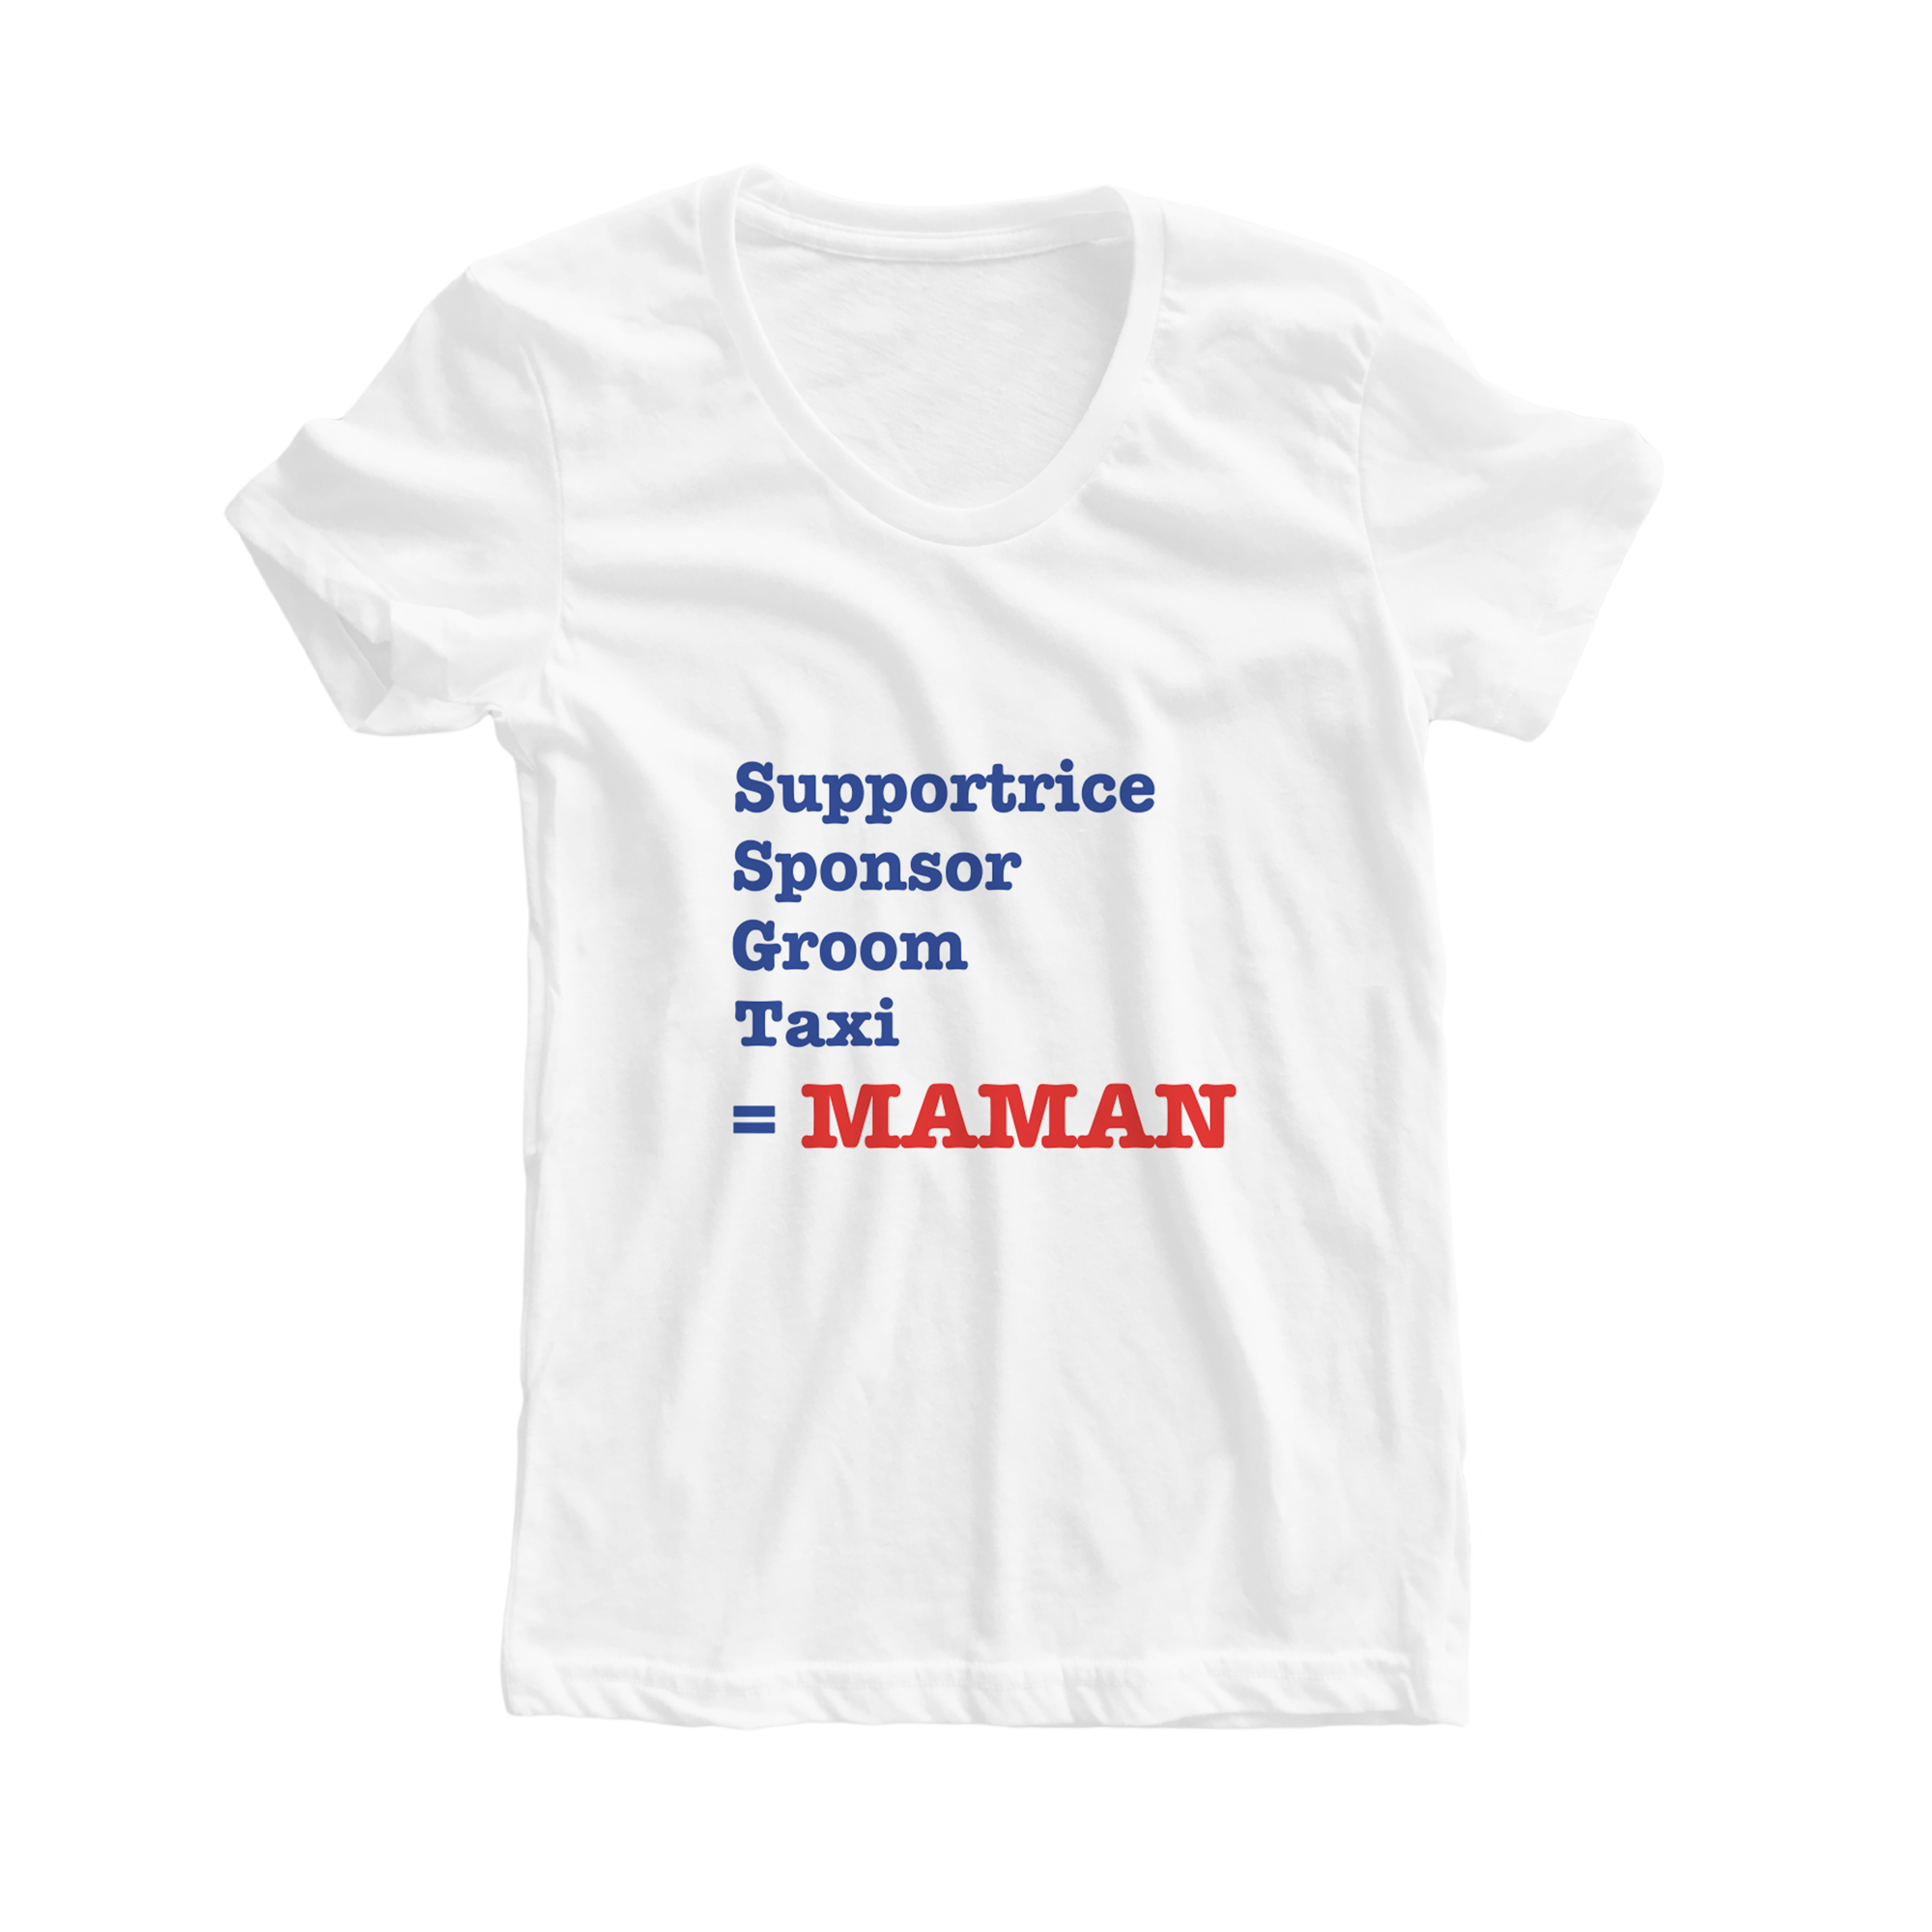 Supportrice, Sponsor ... - T-SHIRT (Femme)